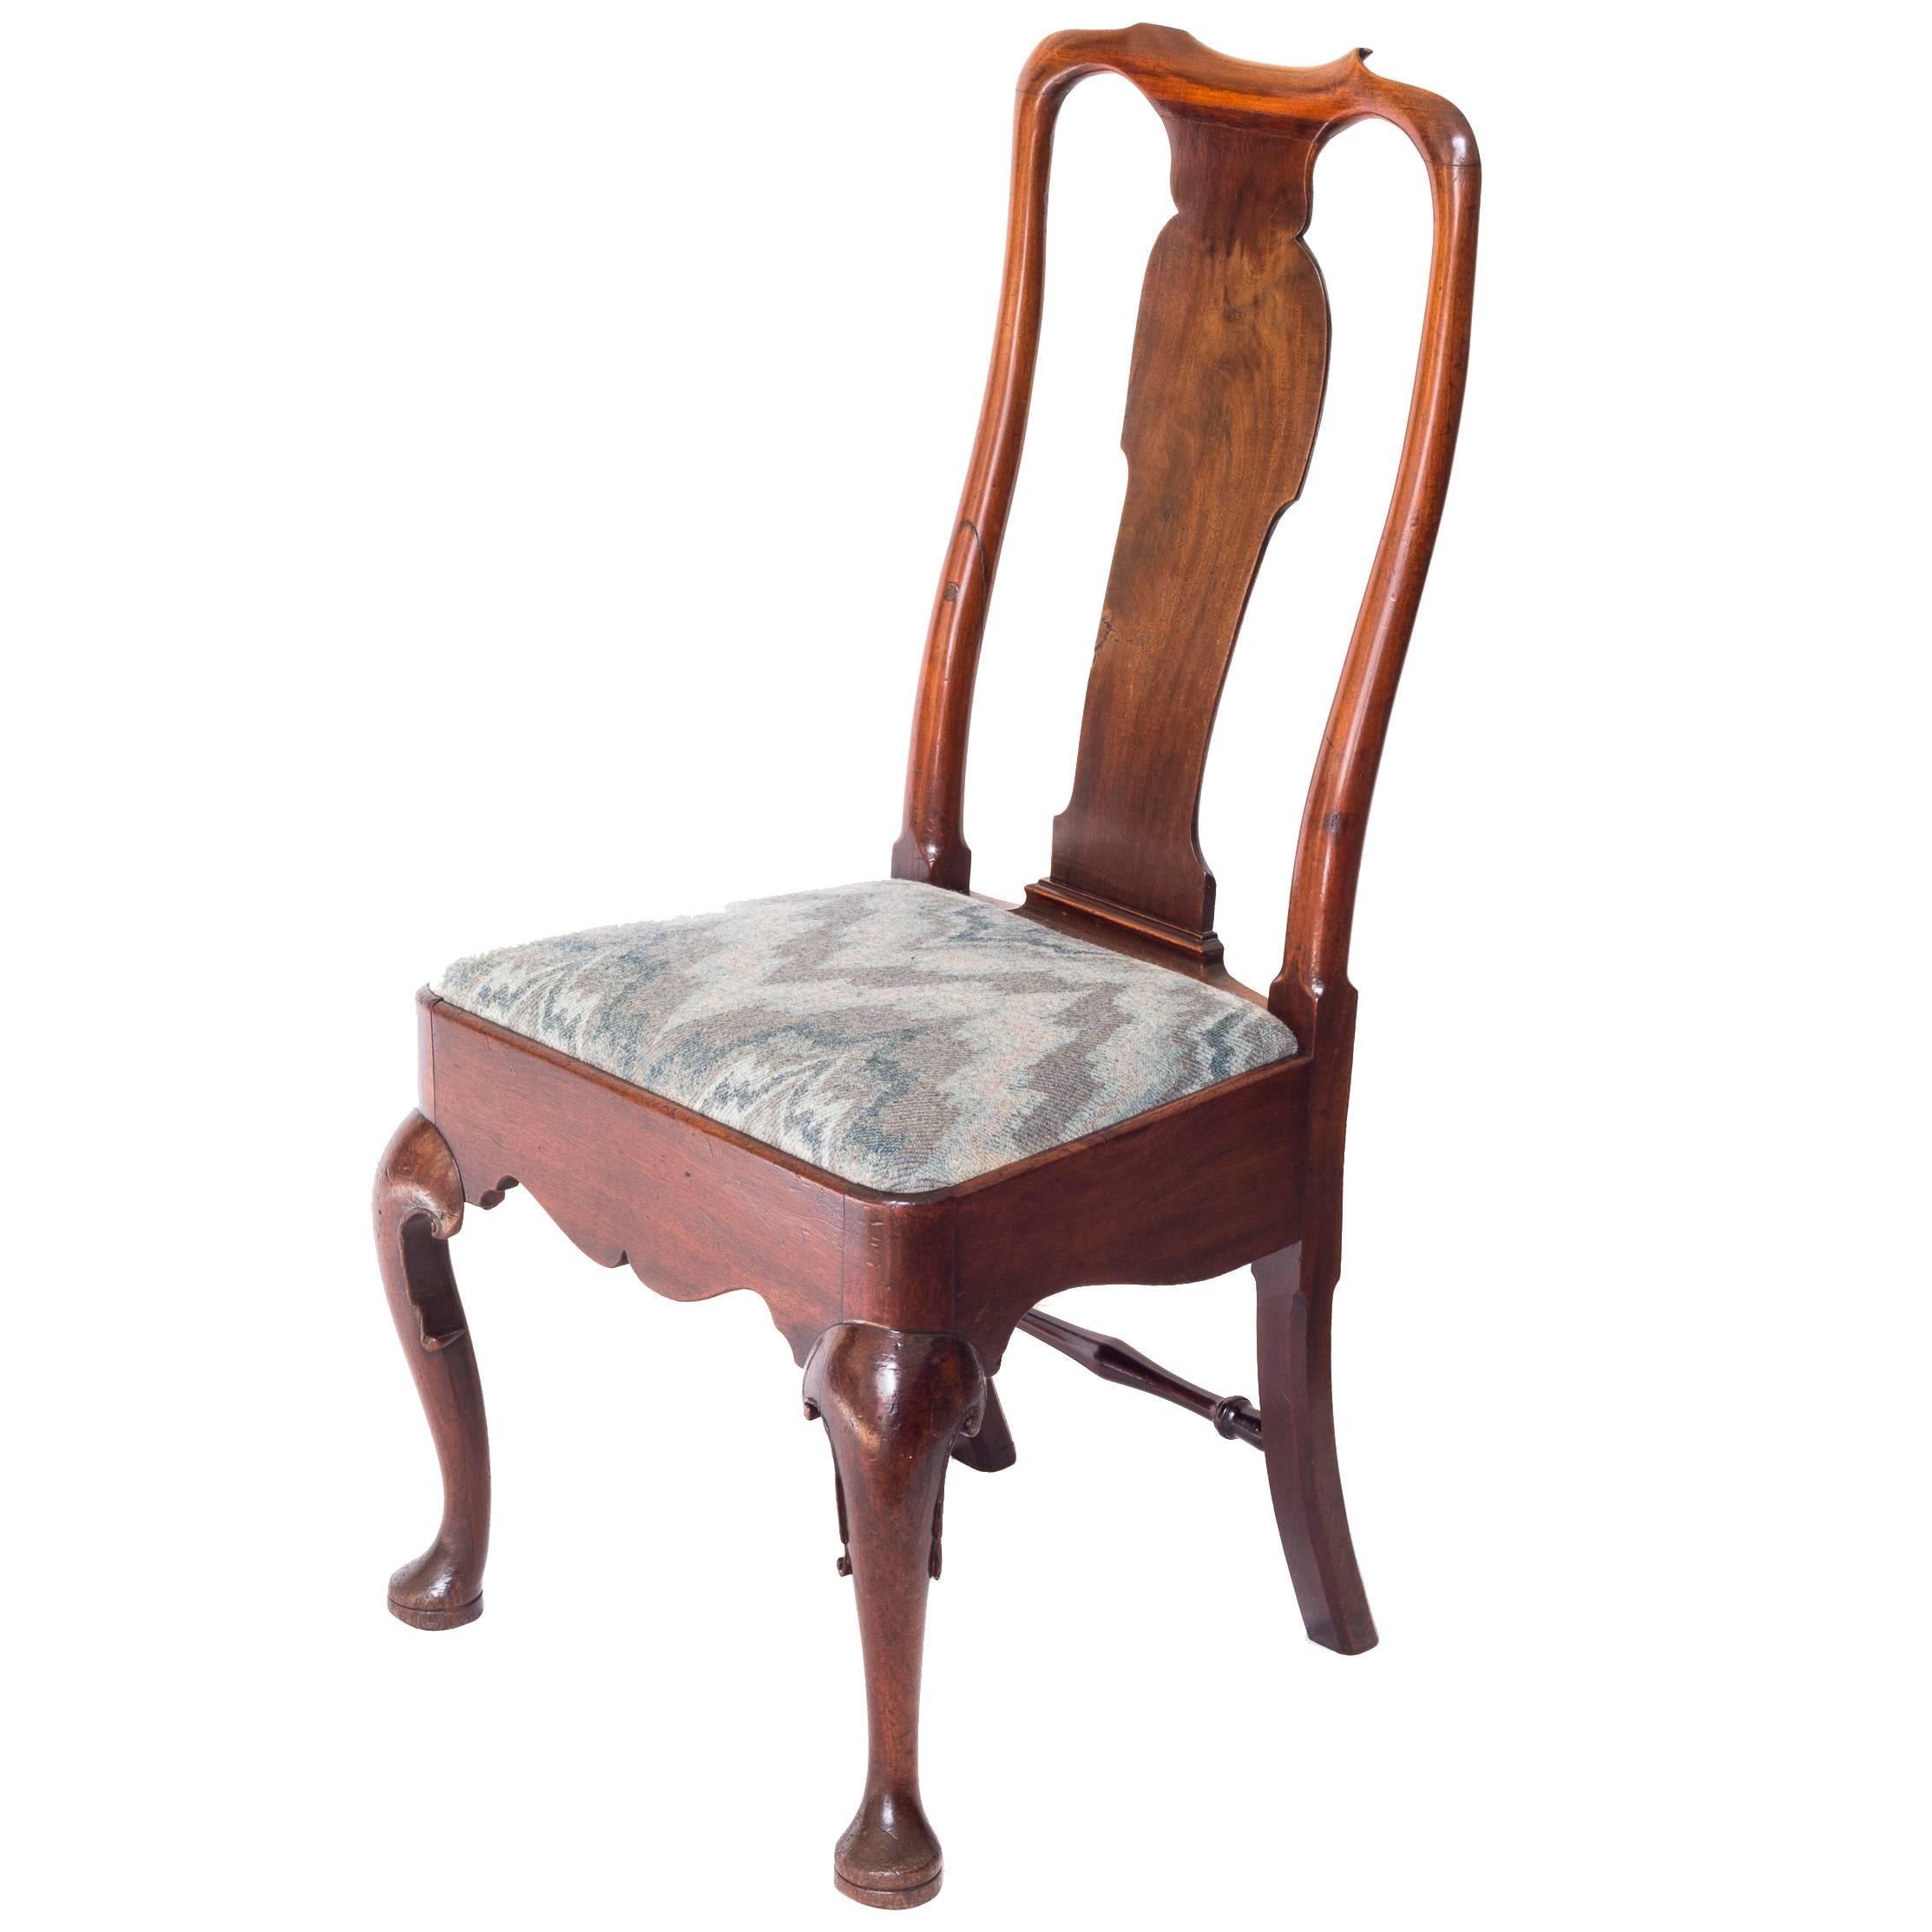 A good George II period side chair in Cuban mahogany, having a well-curved back with scrolled dished toprail above a solid vase-shaped splat, above a padded drop-in seat covered in floral damask, above the shaped apron, raised on well-shaped